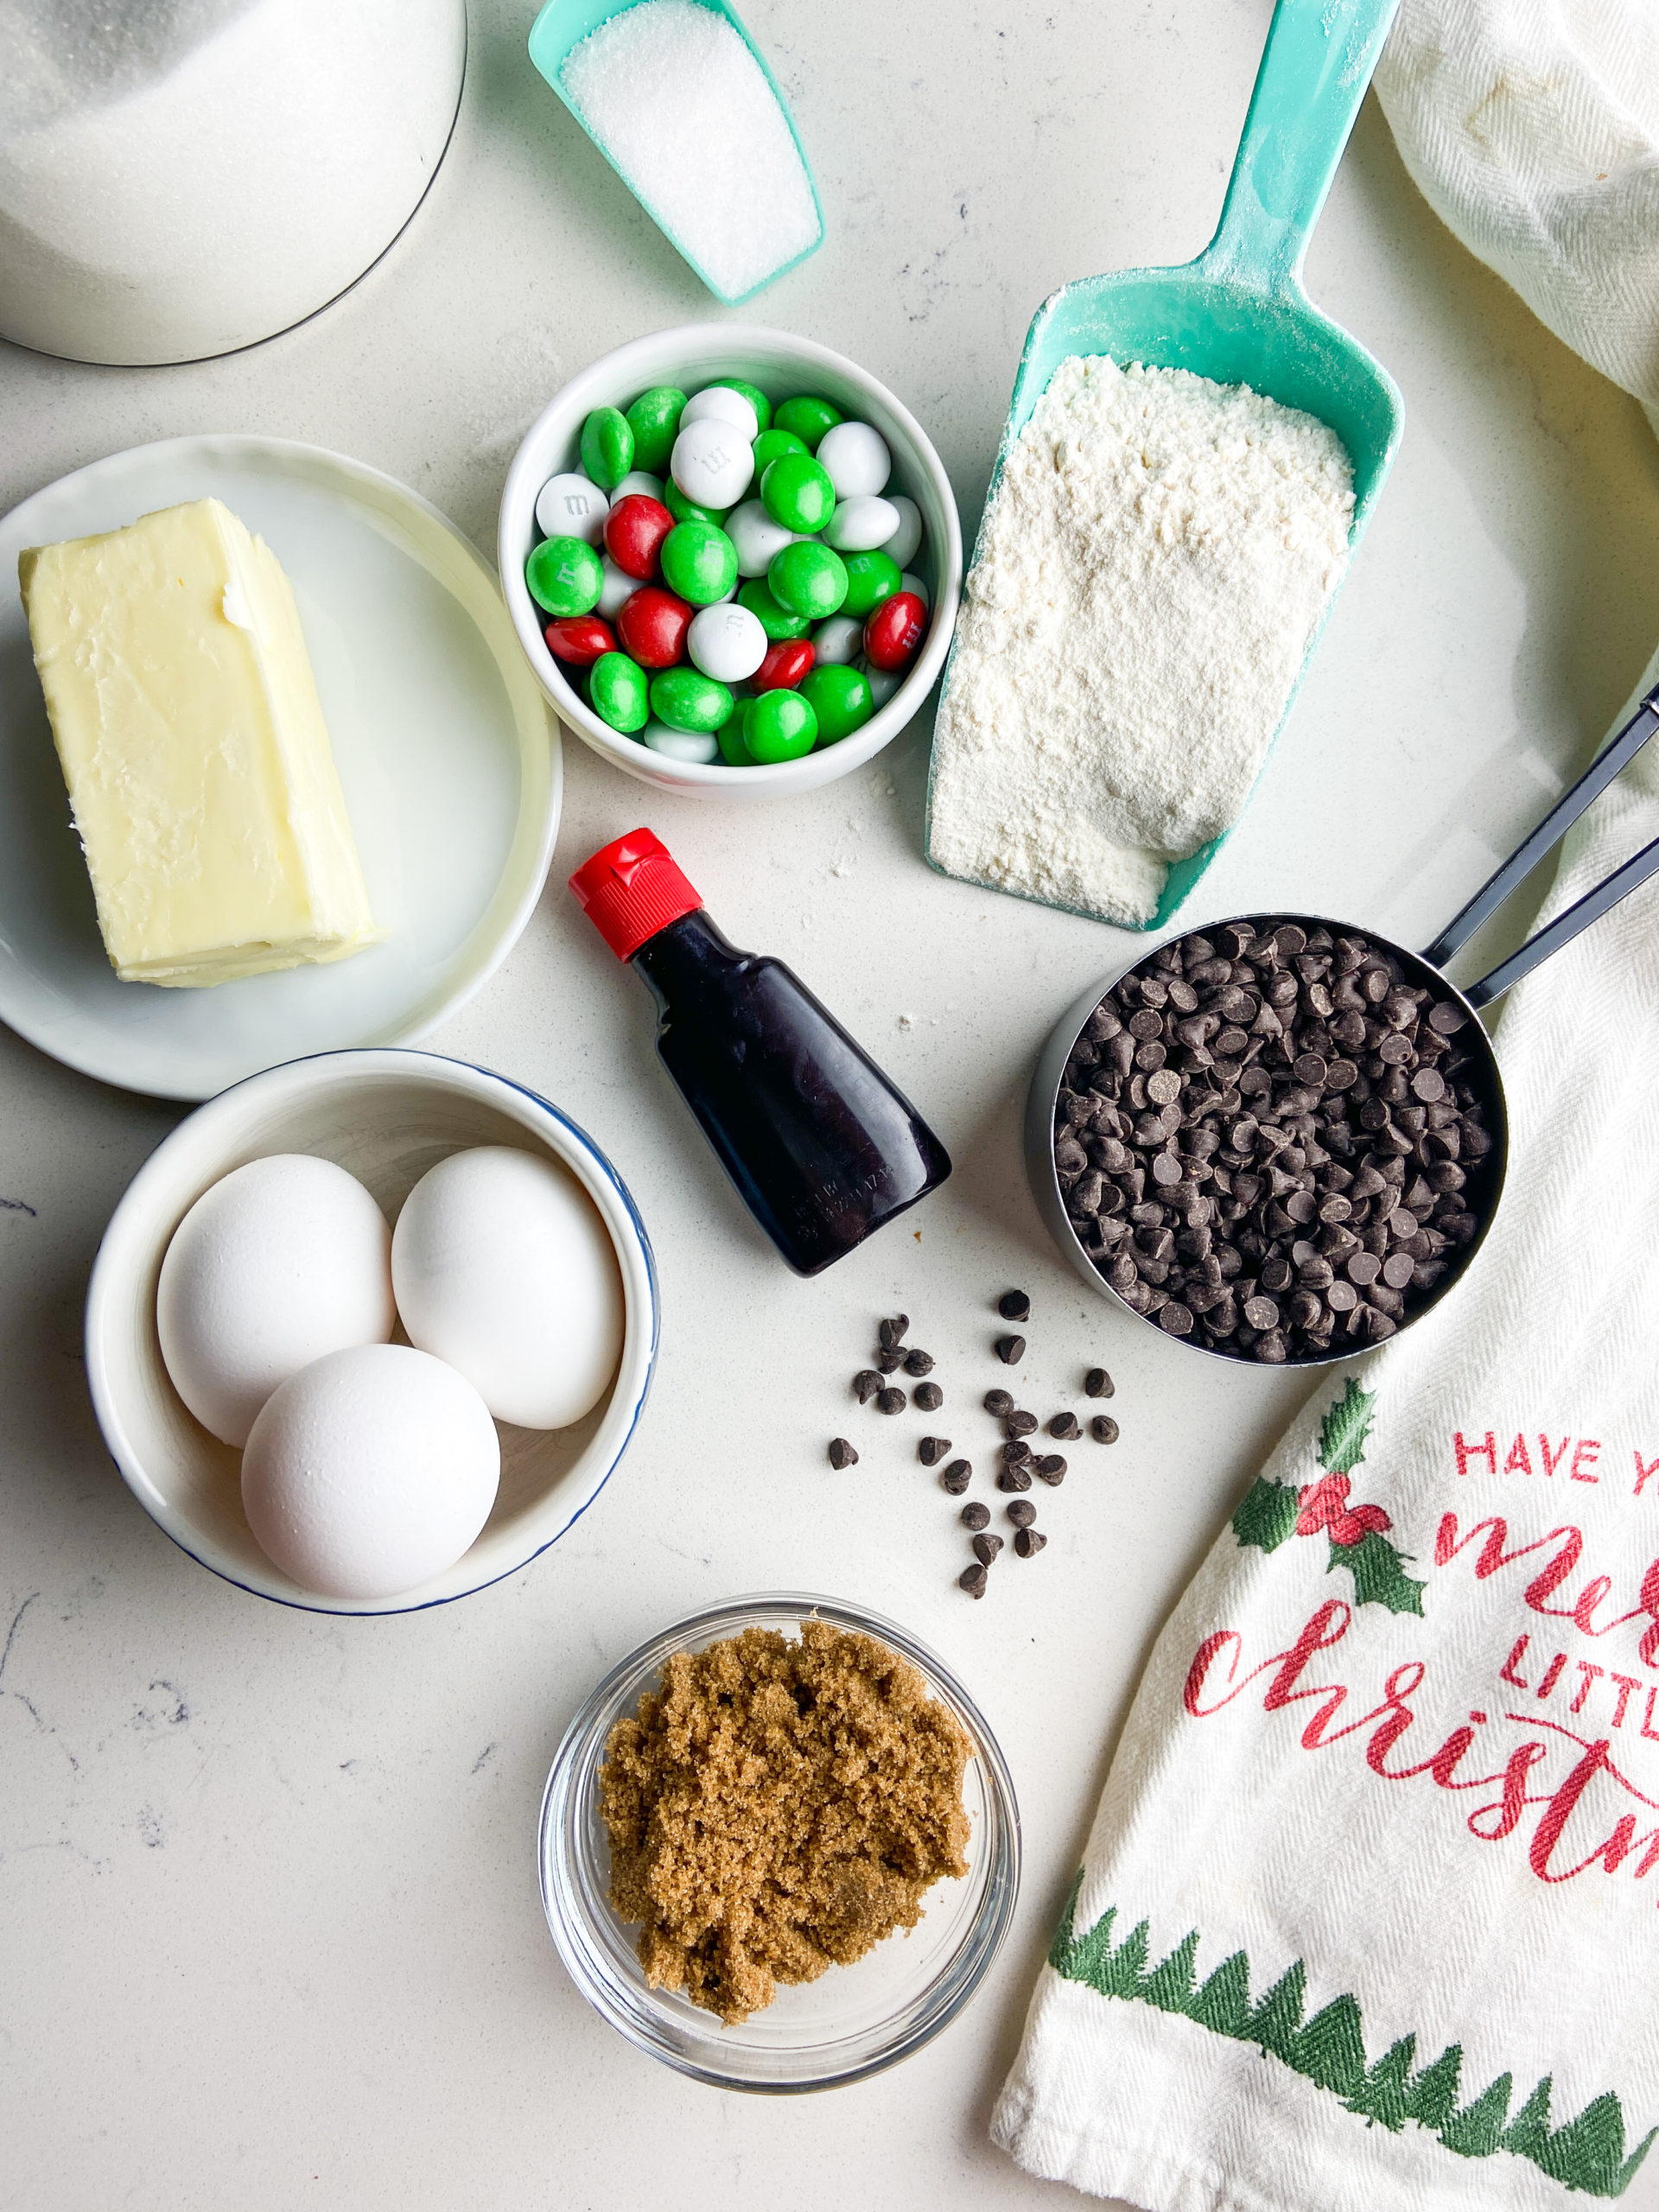 Ingredients for Mint M&M cookie bars